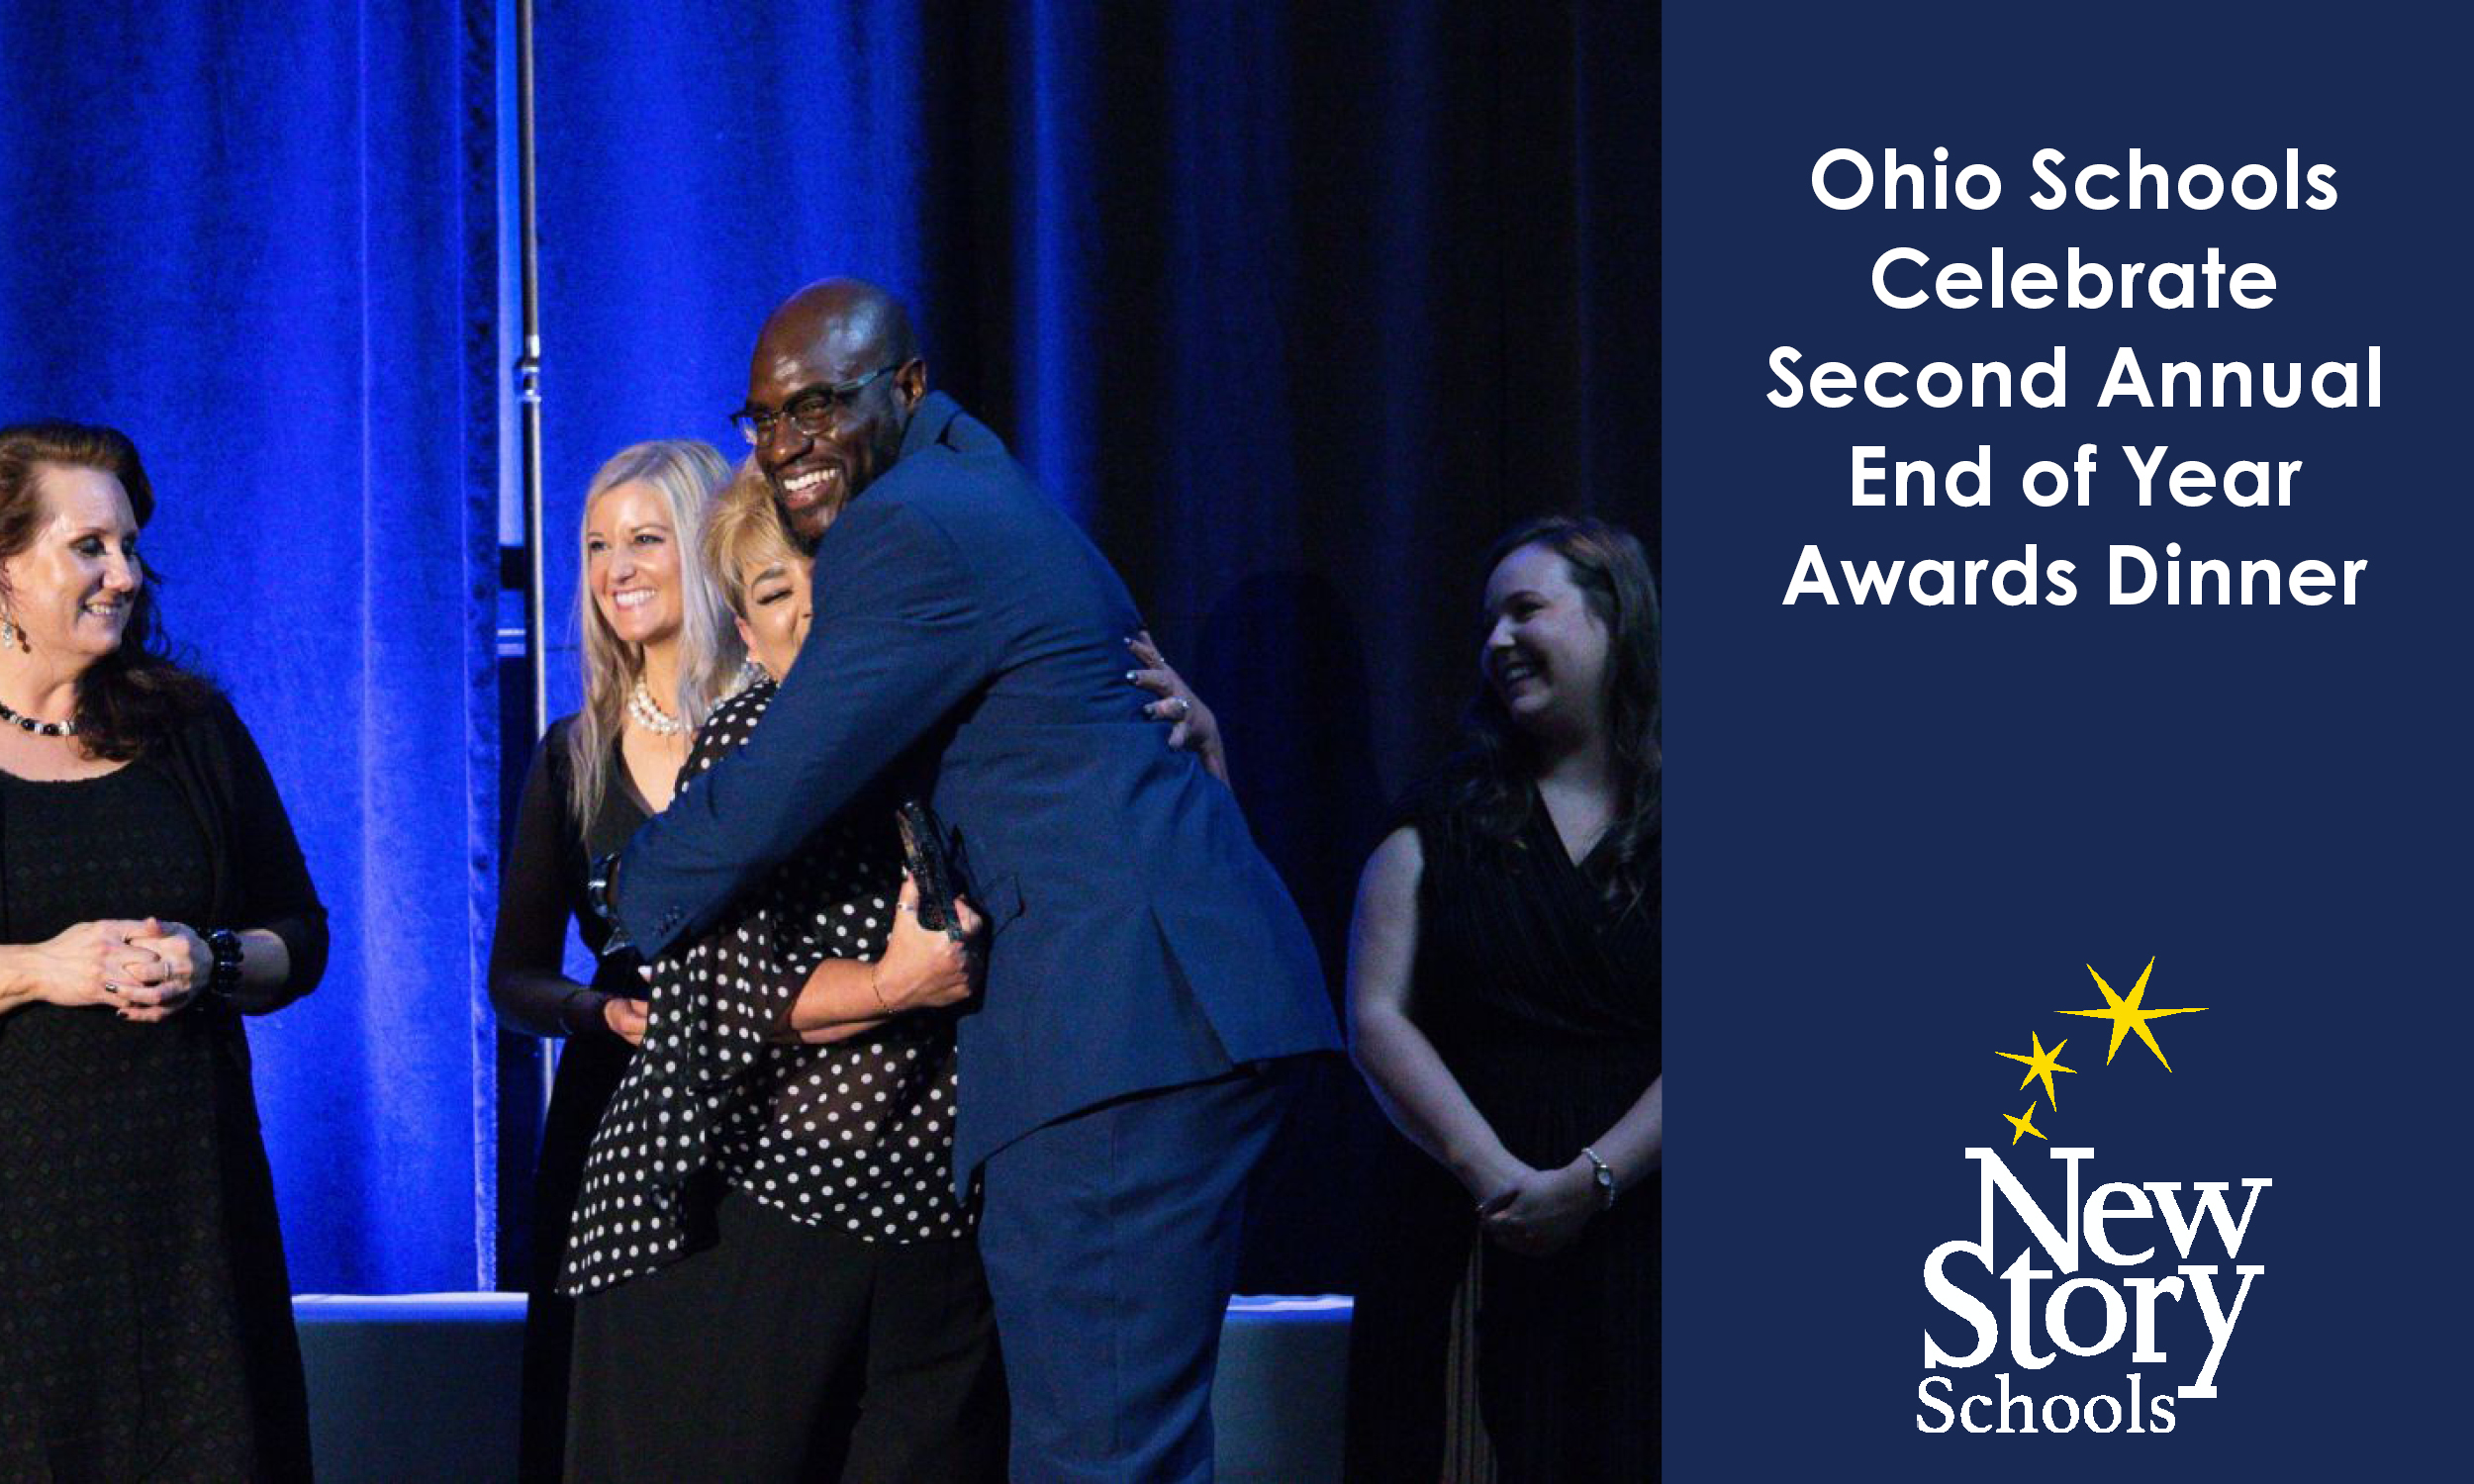 Ohio Schools Celebrate Second Annual End of Year Awards Dinner